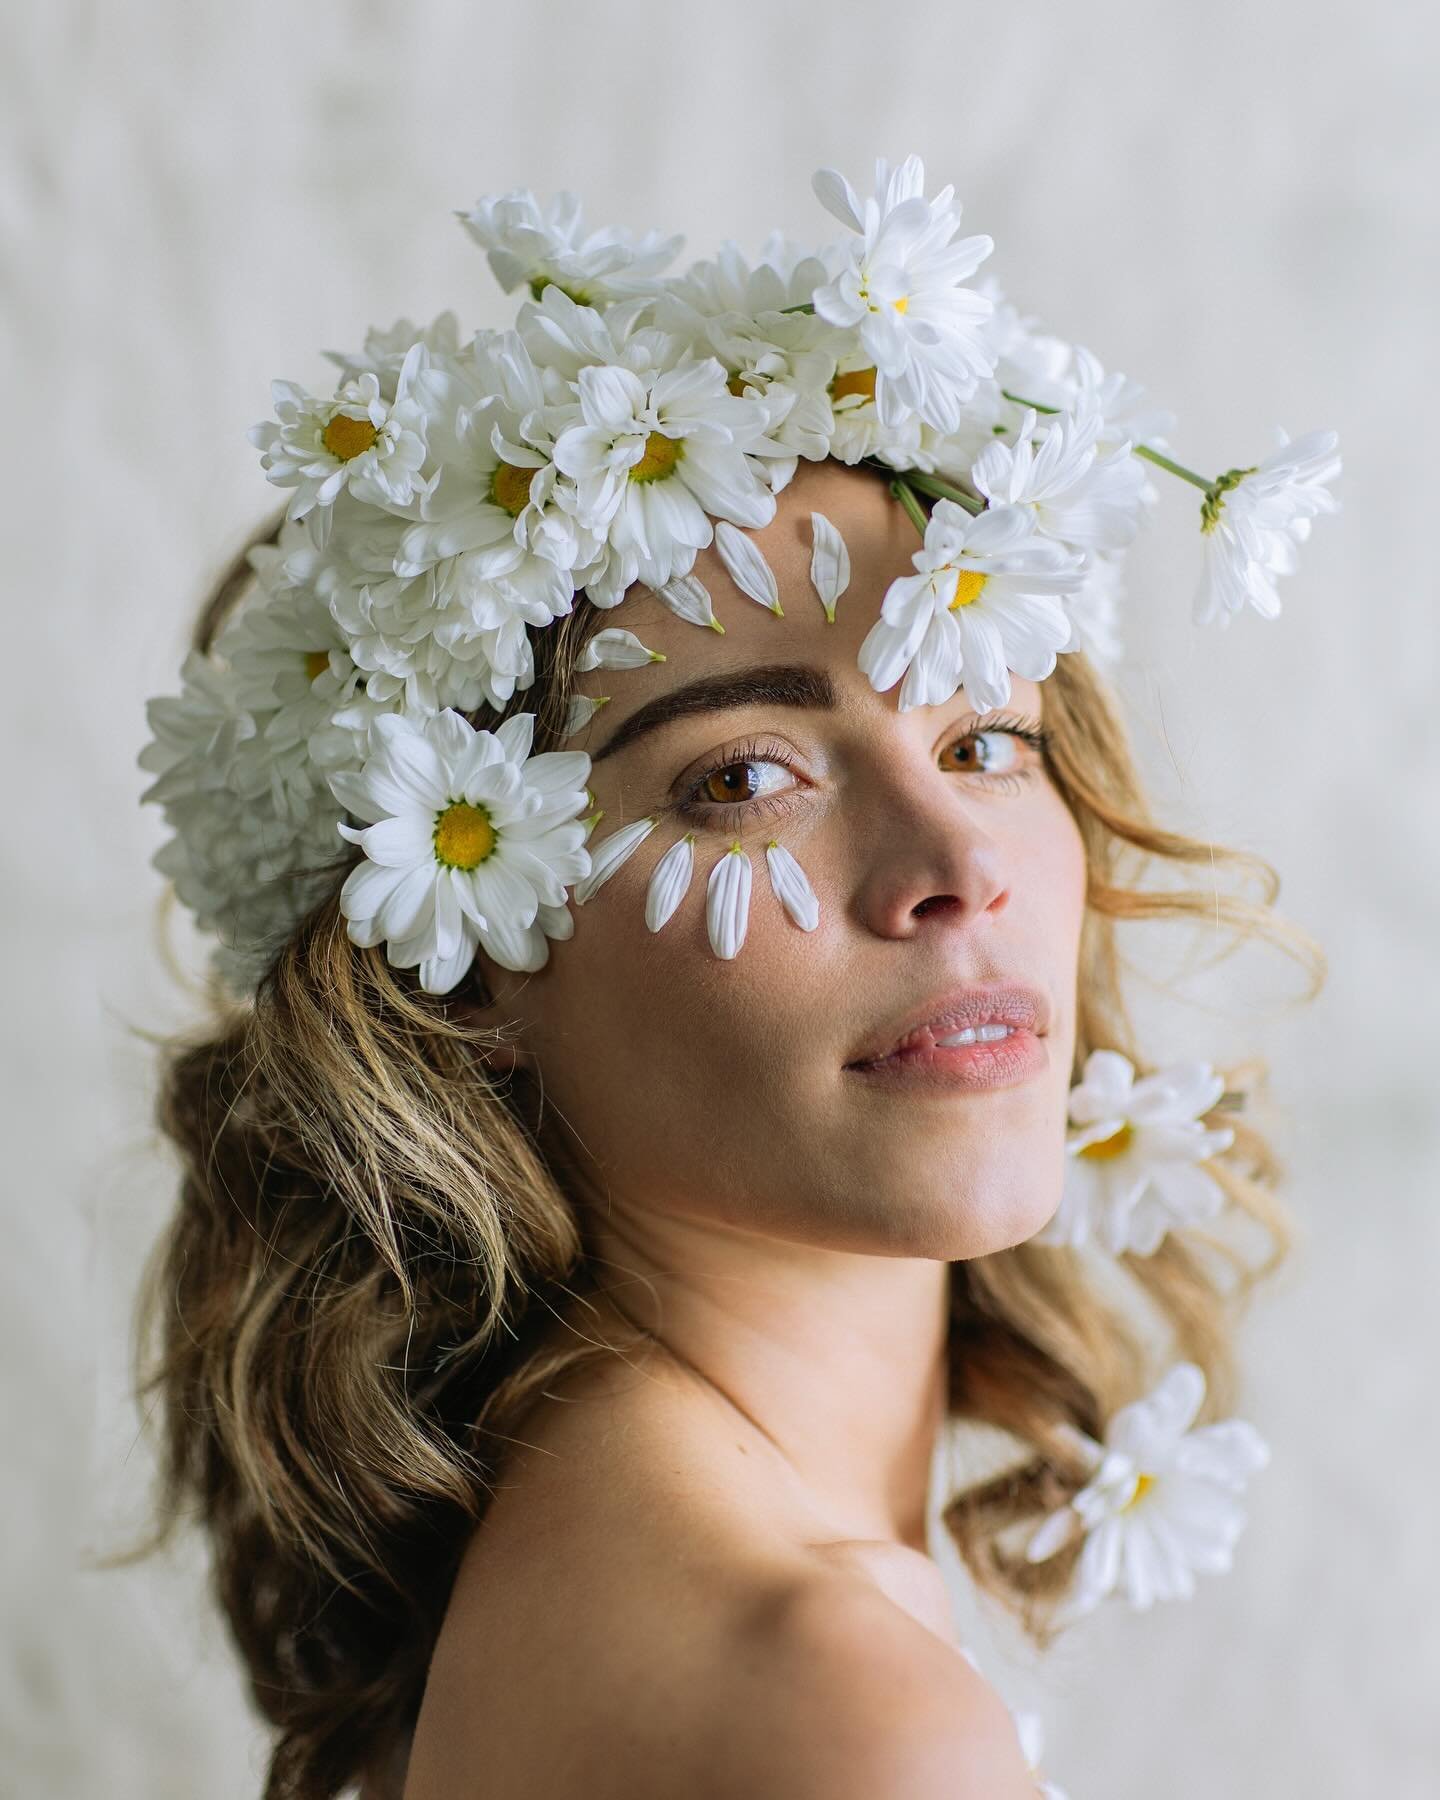 Florals for Spring? Groundbreaking. - if you find yourself in a slump and need a pick me up I&rsquo;ve got the photos, Monet has the flowers. 

Finding a creative group of friends that you just jive with for silly little creative collaborations on th